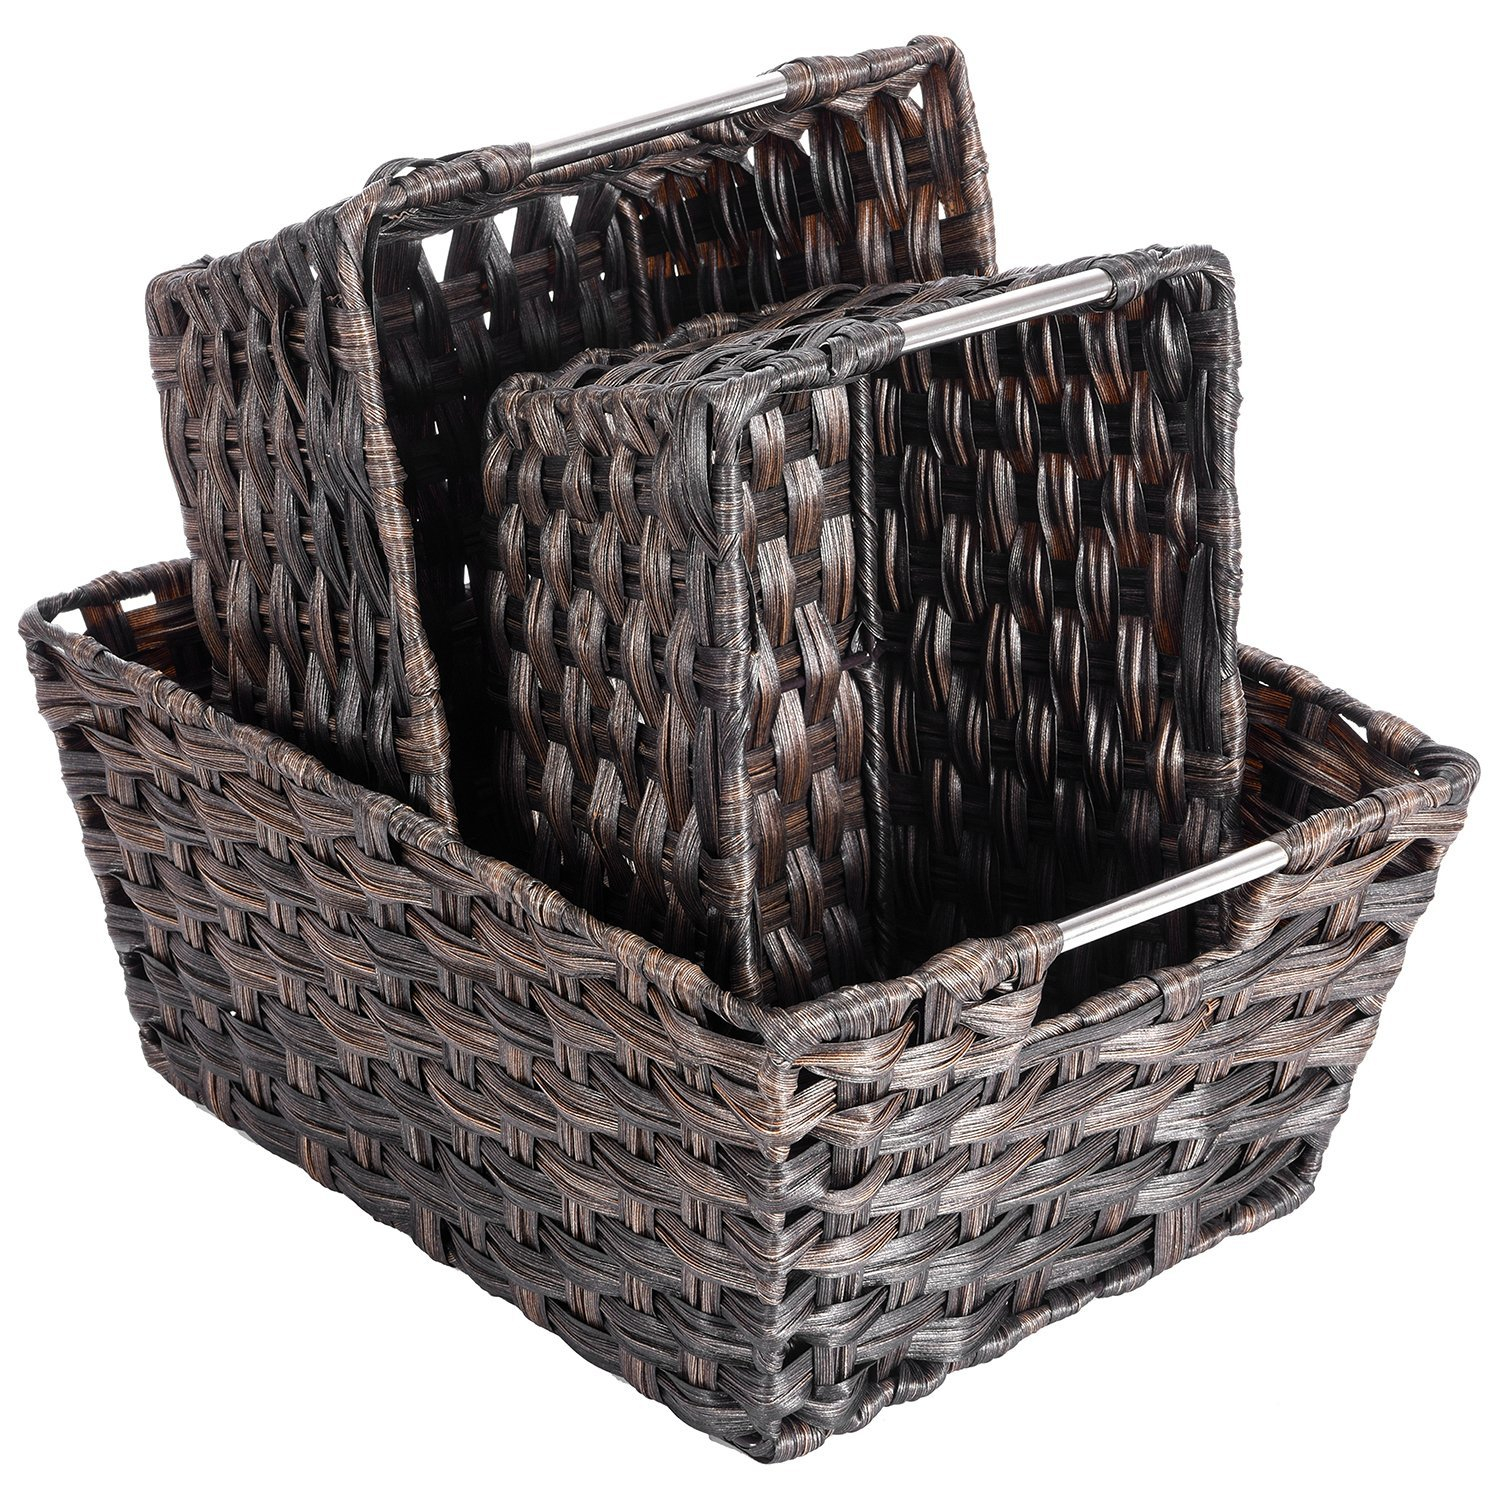 Woven Baskets Maidmax Rectangular Rattan Storage Baskets With Metal throughout size 1500 X 1500